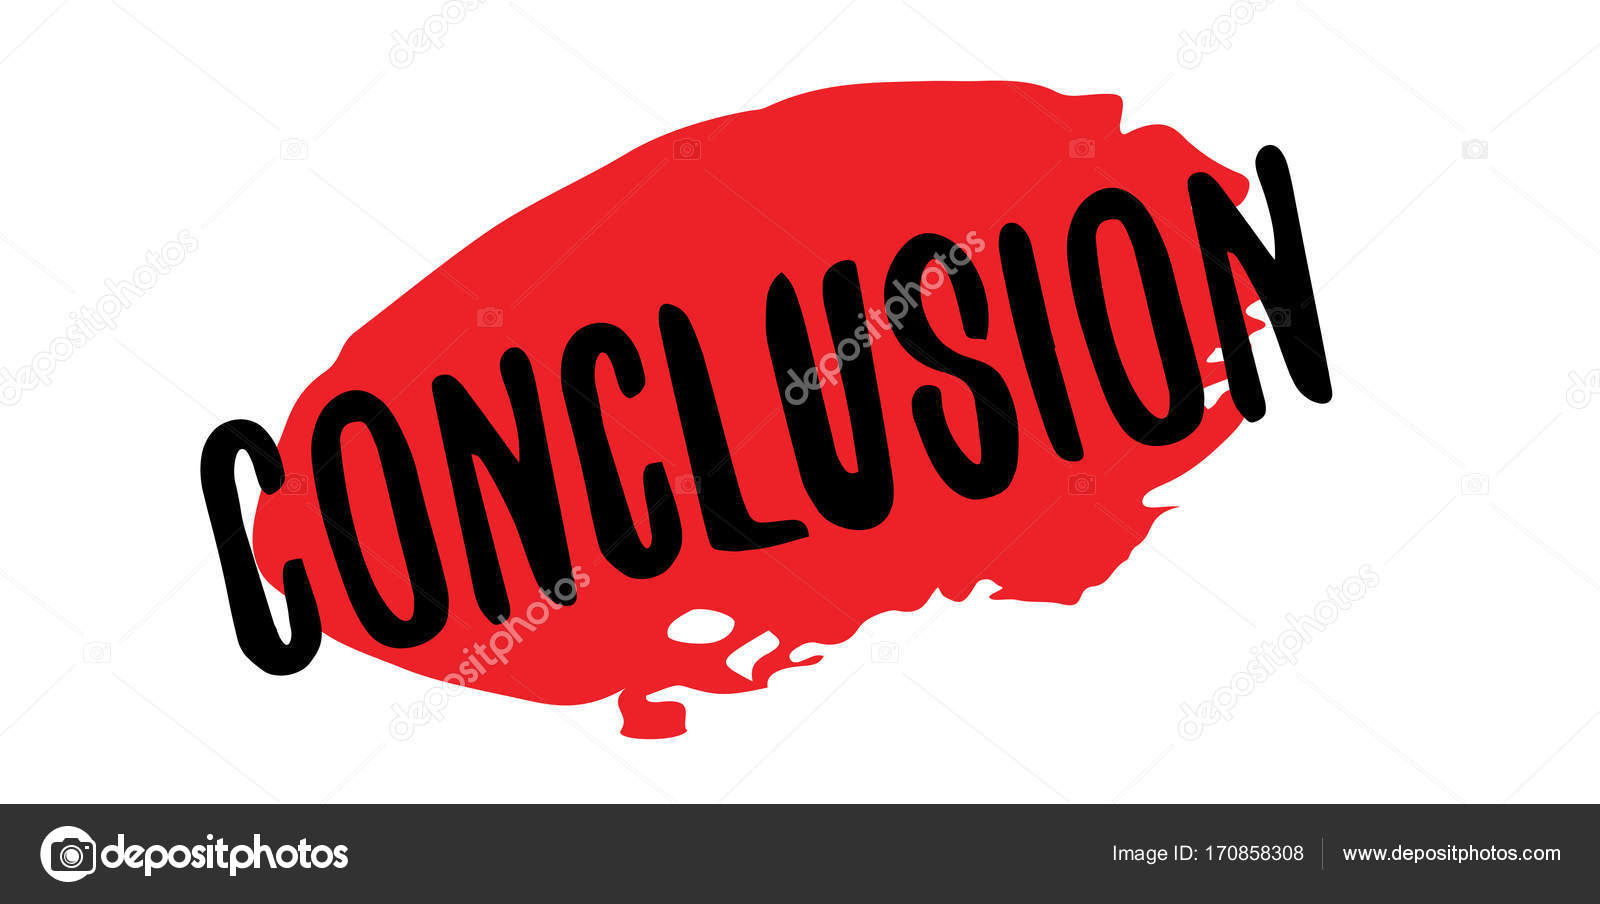 Conclusion Rubber Stamp Vector Image By C Lkeskinen0 Vector Stock